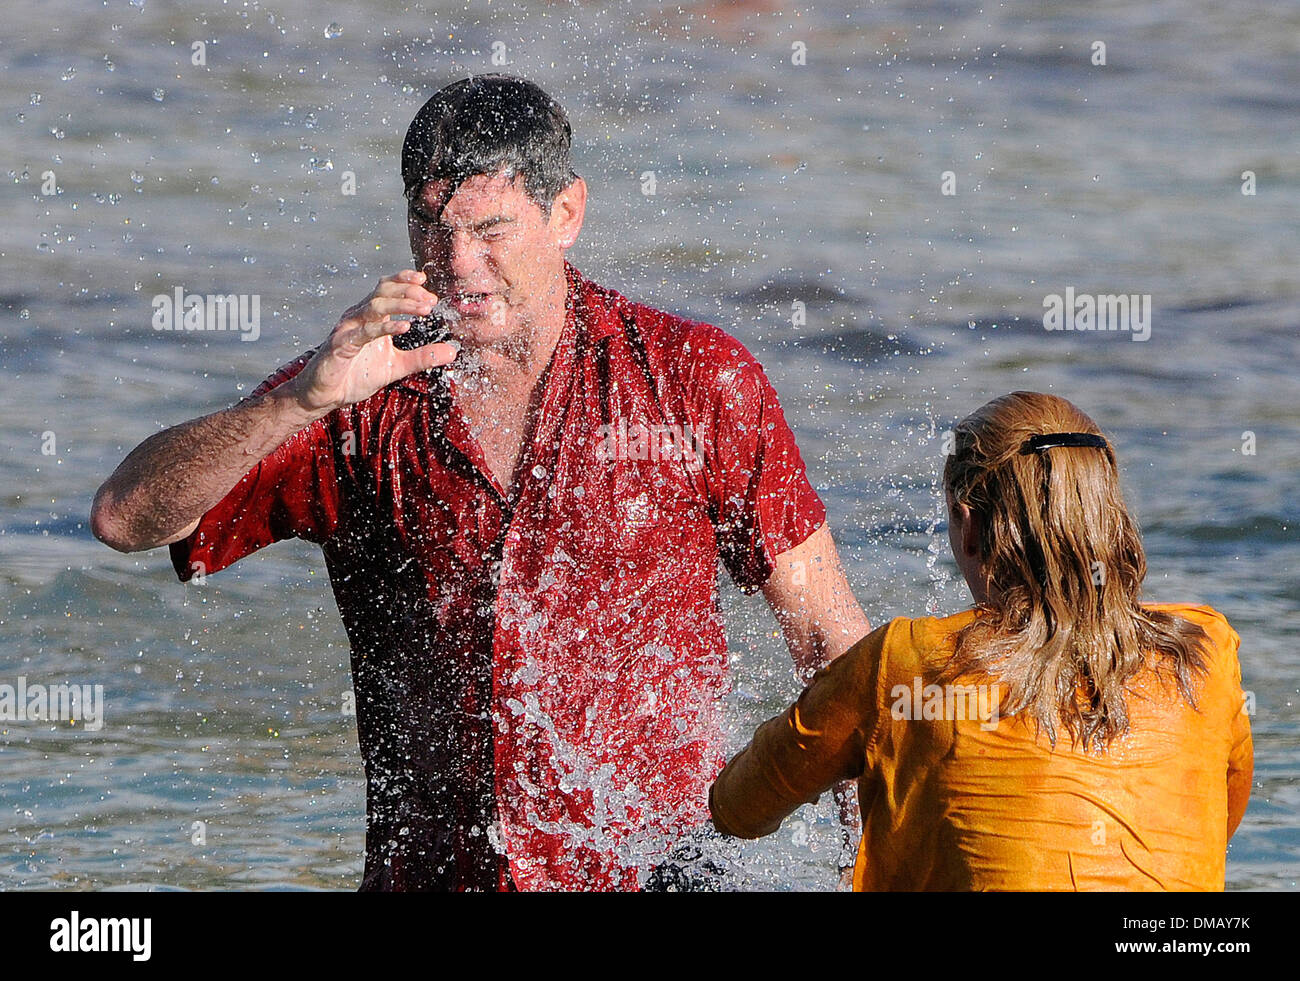 Actor Pierce Brosnan on the set of the movie 'A long way down'. Shot in Mallorca in October 2012. Stock Photo